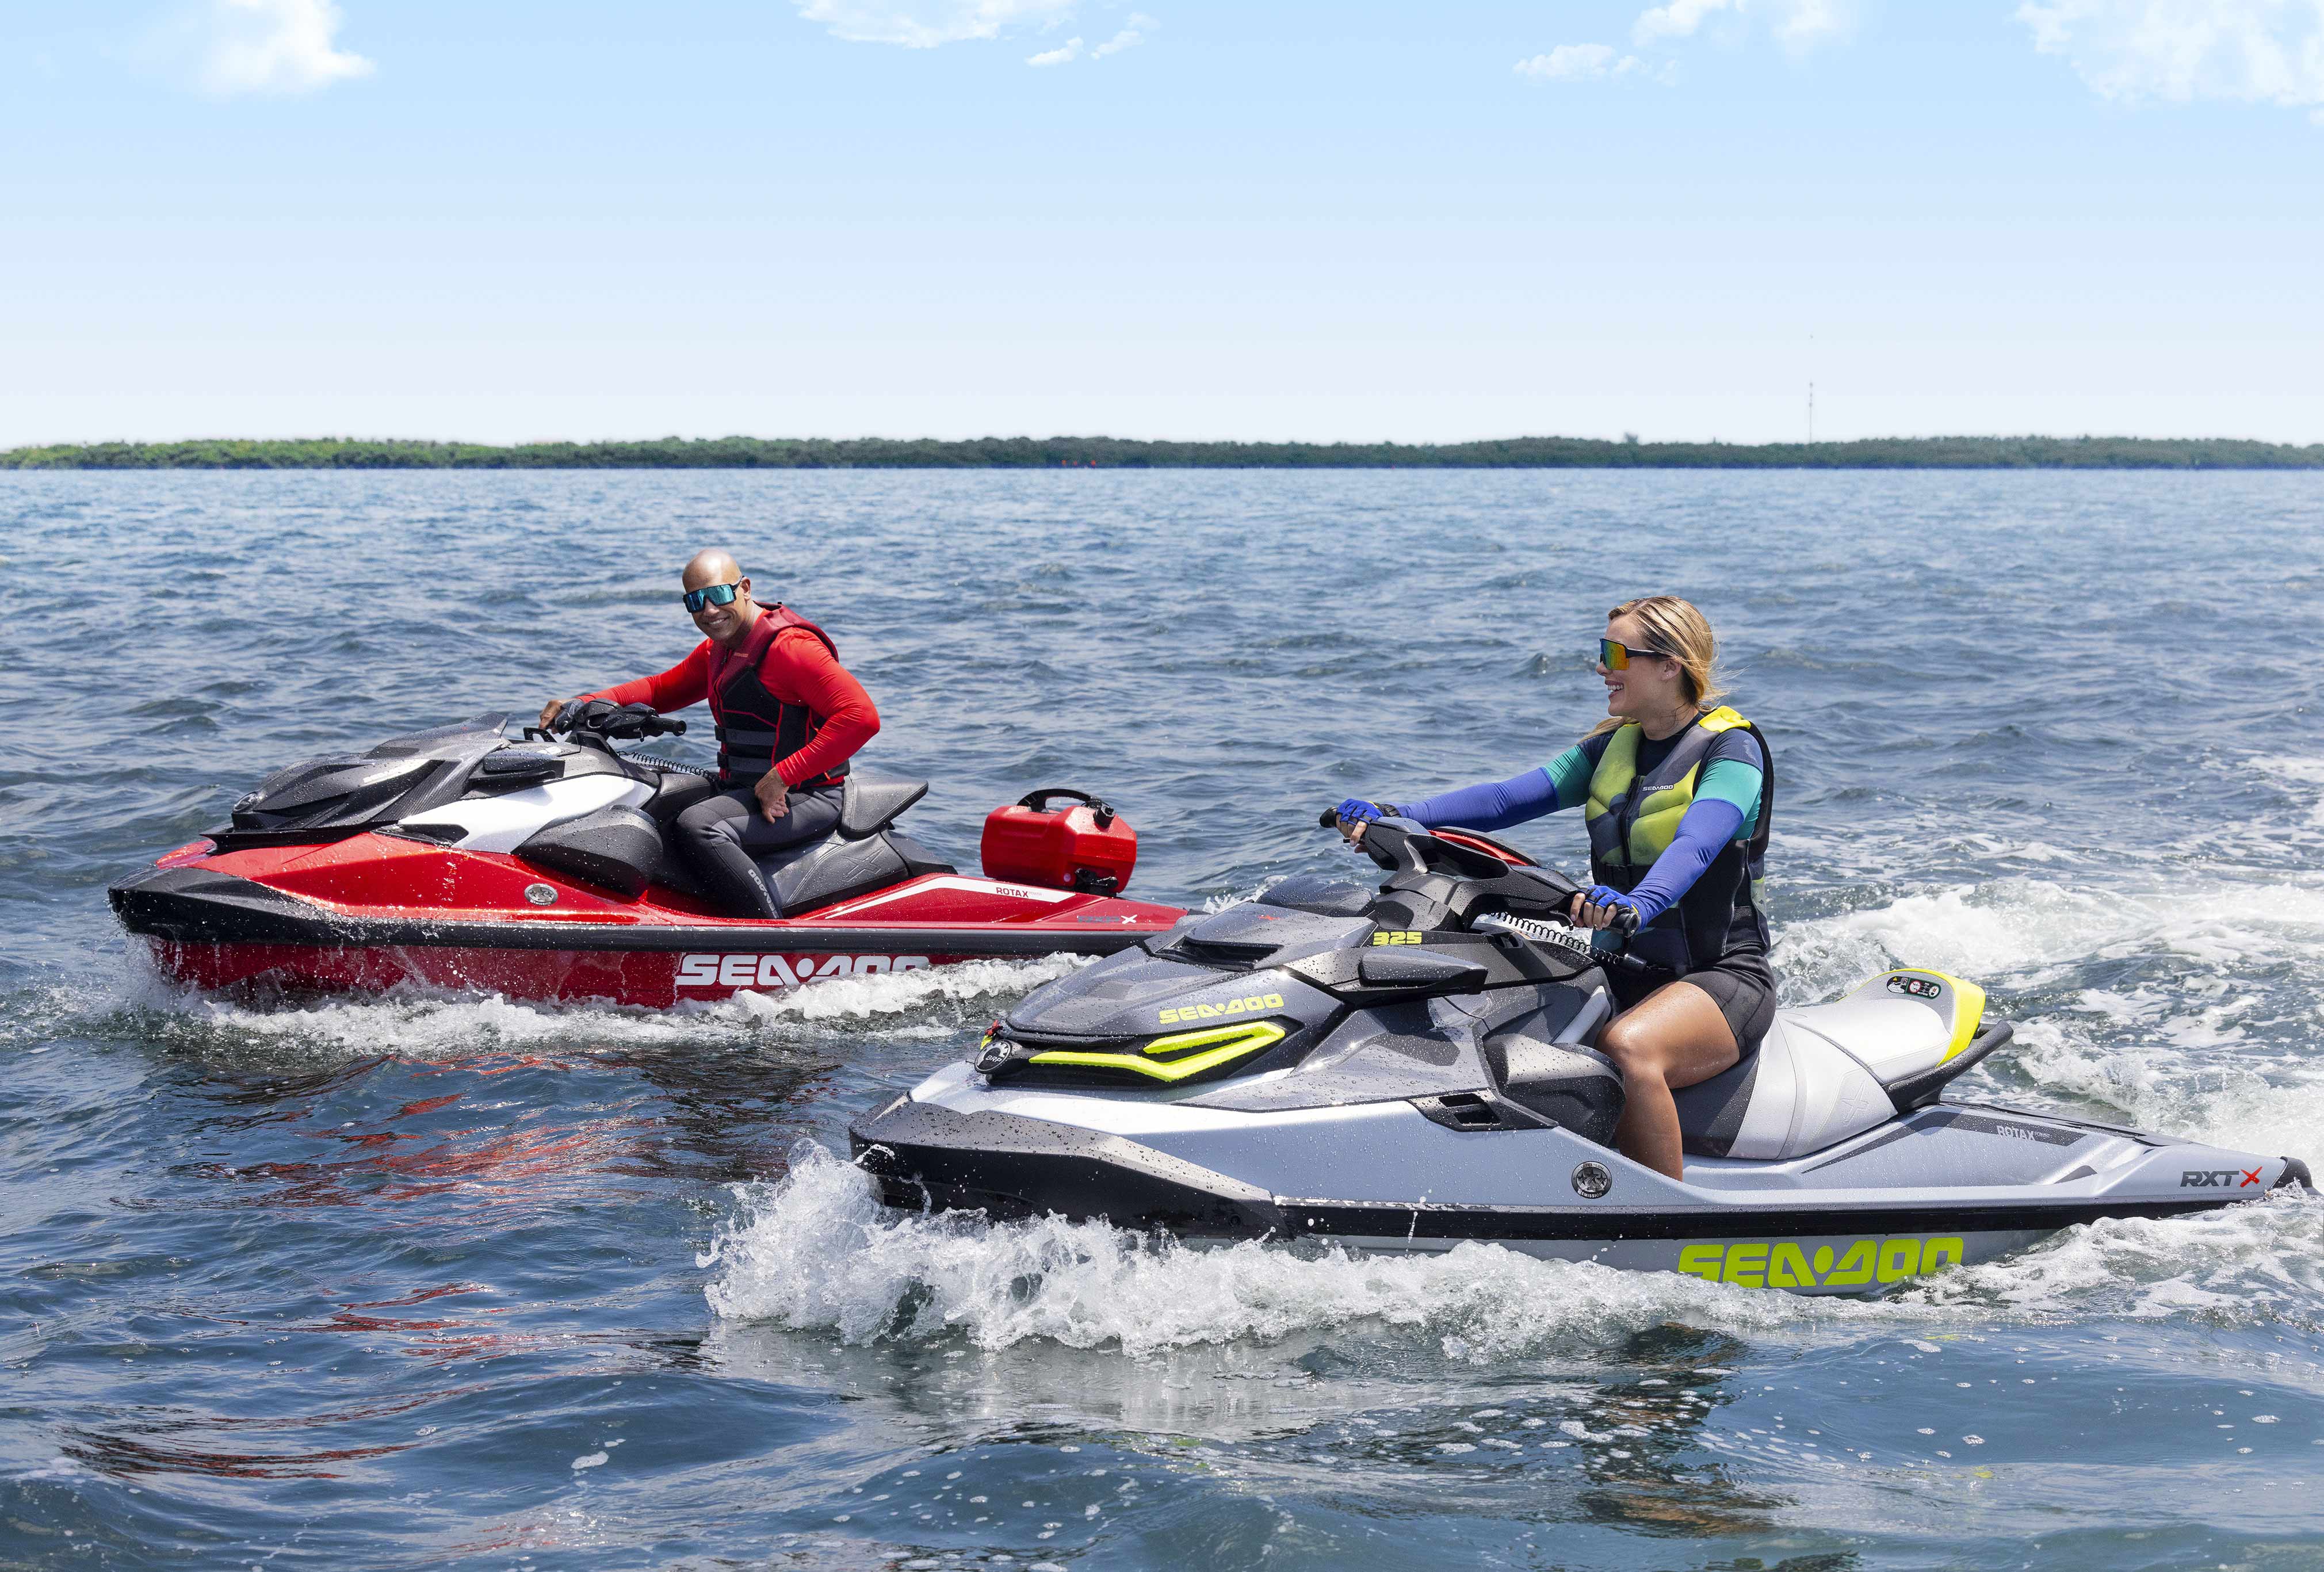 To venner med to Sea-Doo Spark vannscootere